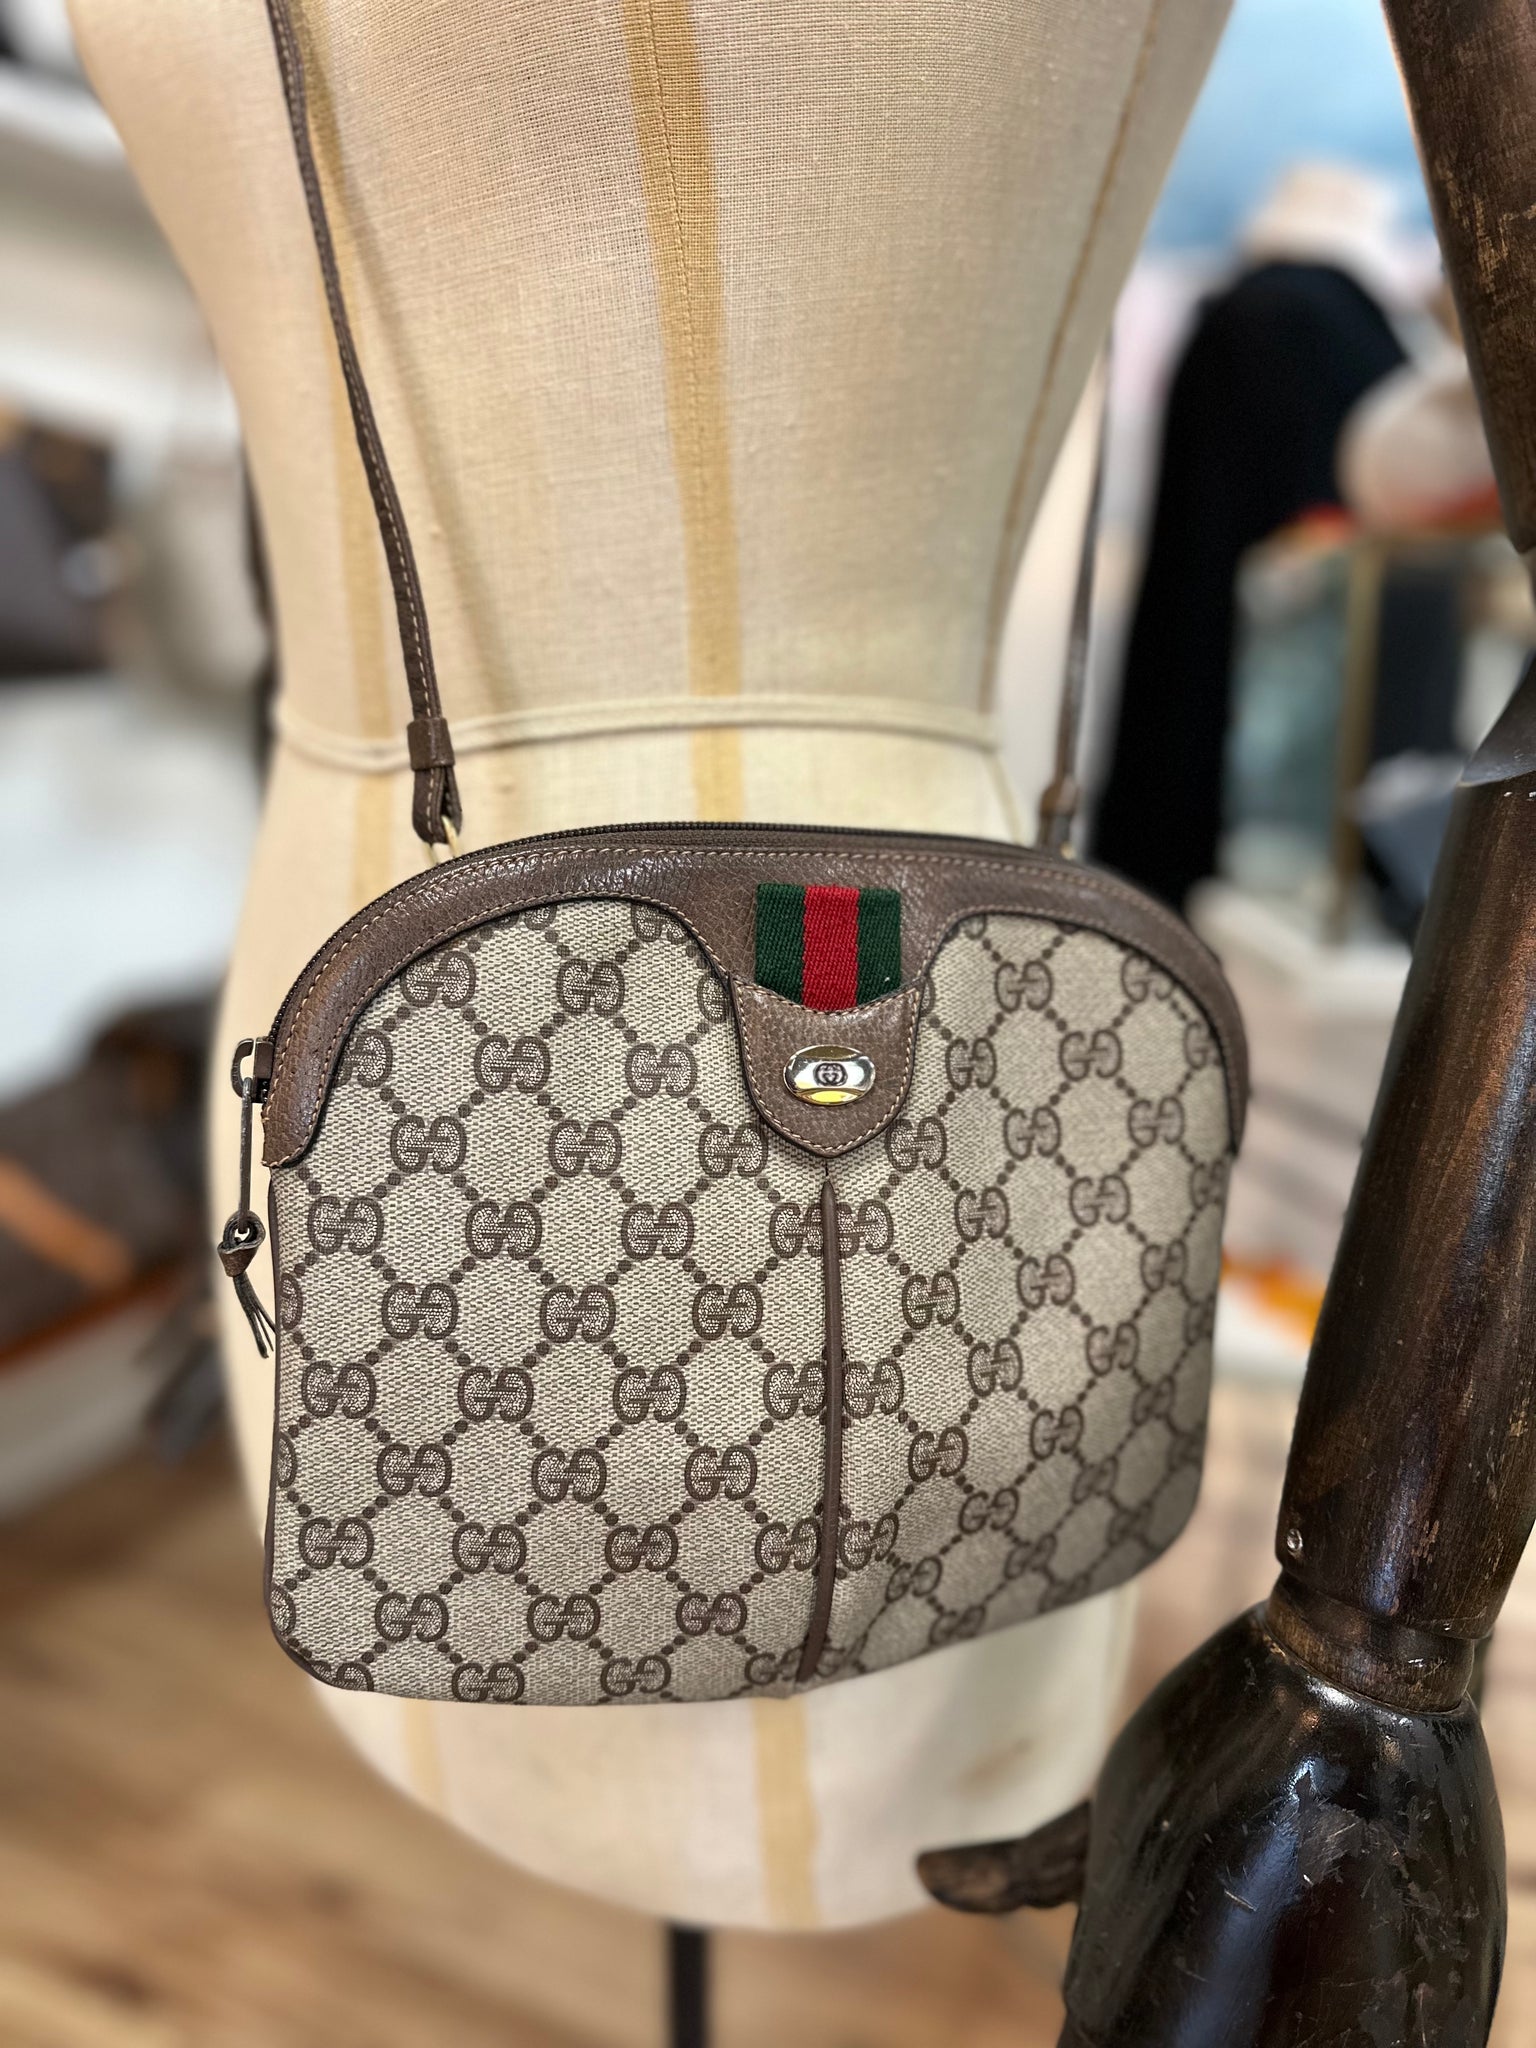 Authenticated Used GUCCI Old Gucci GUCCIPLUS Plus Tote Bag Handbag